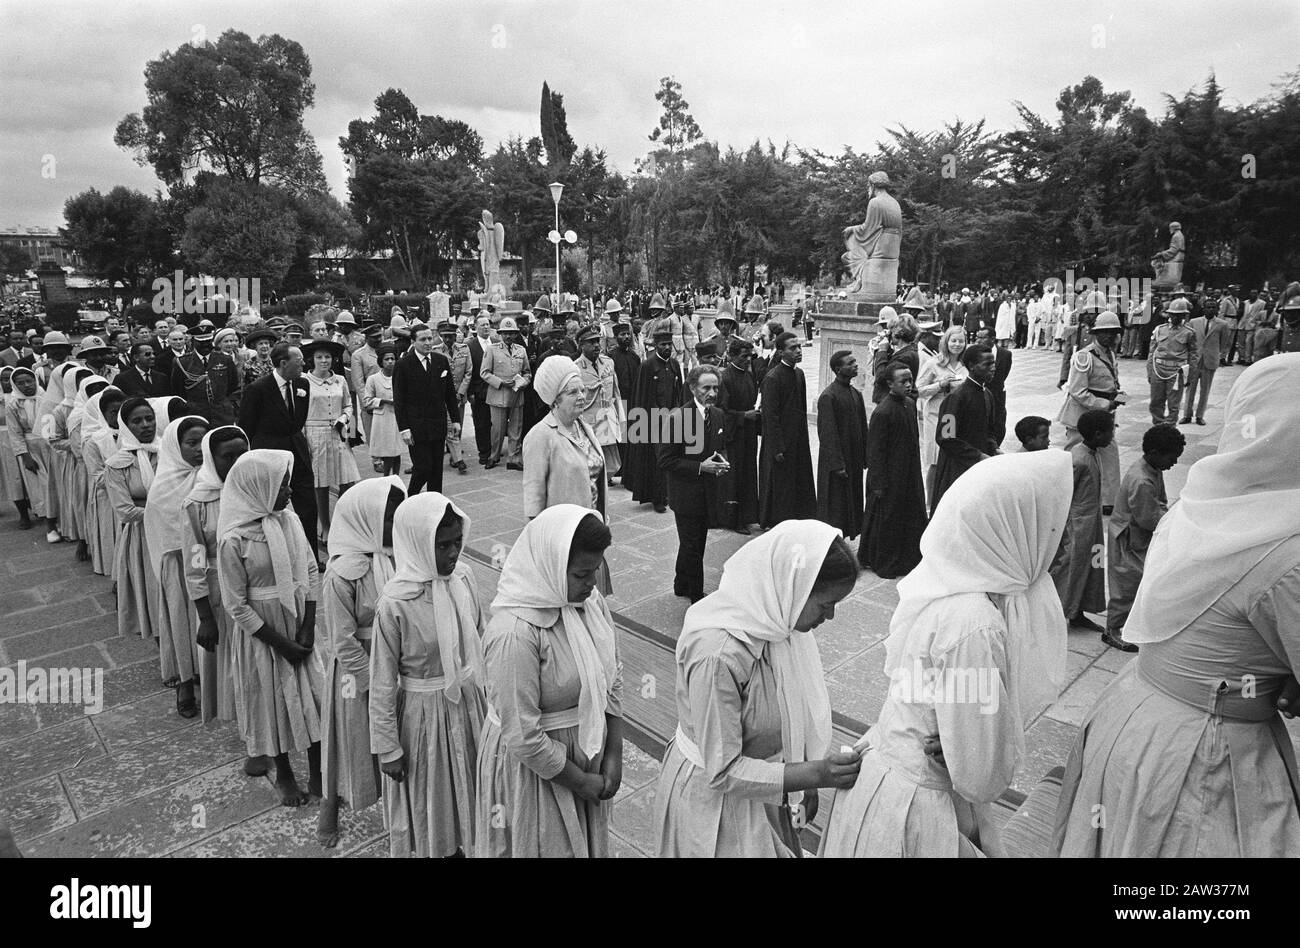 State Visit royal family to Ethiopia Royal Family visits Holy Trinity  Cathedral in Addis Ababa; Royal guests and Haile Selassie walk to the  church hedge of people Date: January 28, 1969 Location: